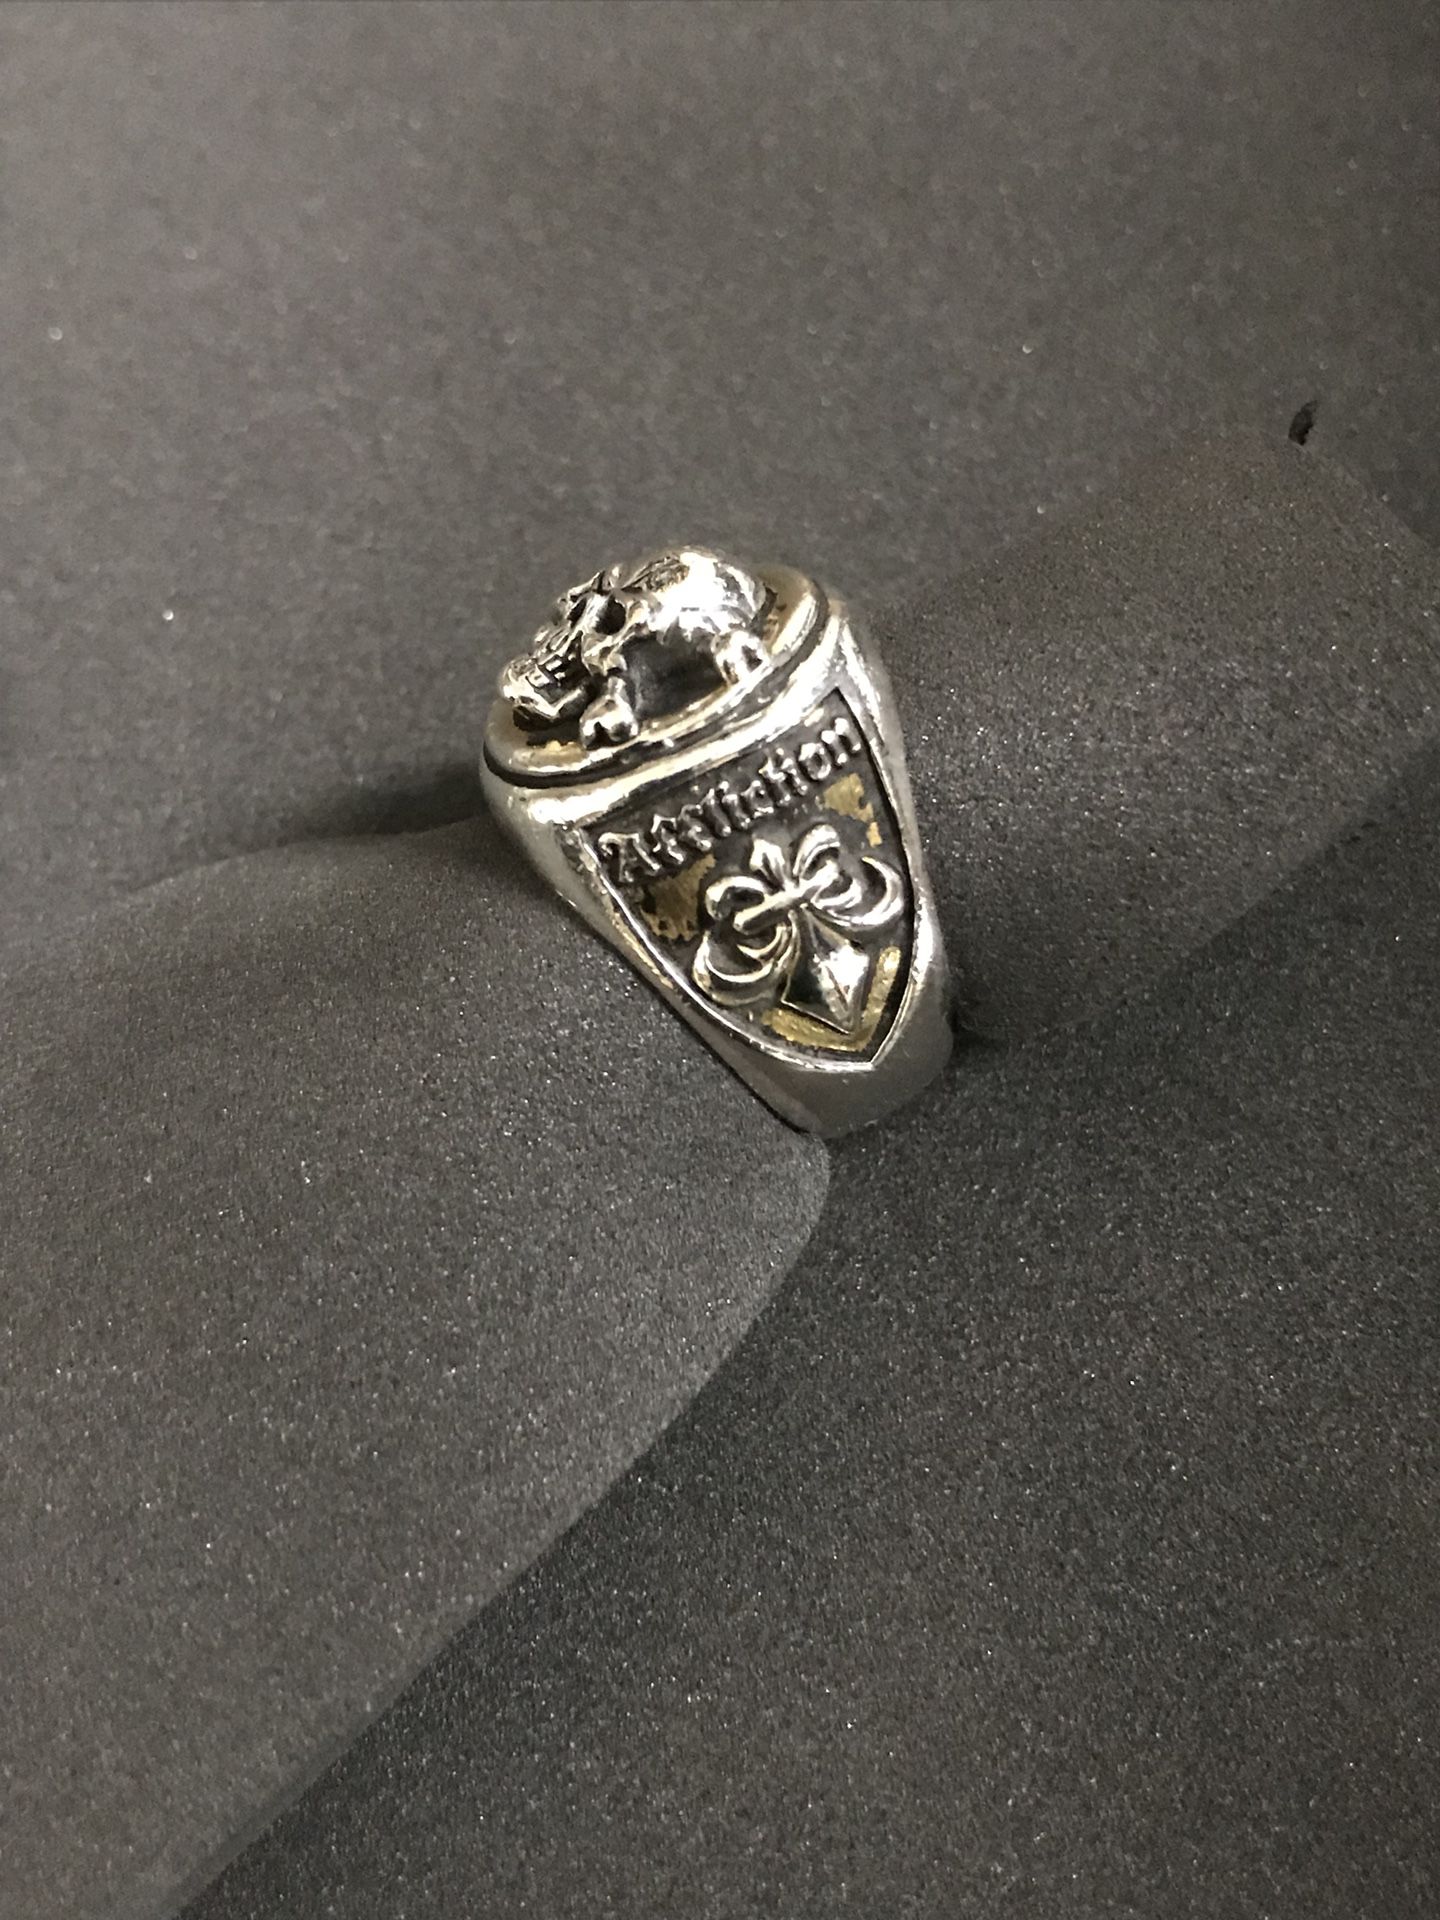 Affliction ring for Sale in Redondo Beach, CA - OfferUp